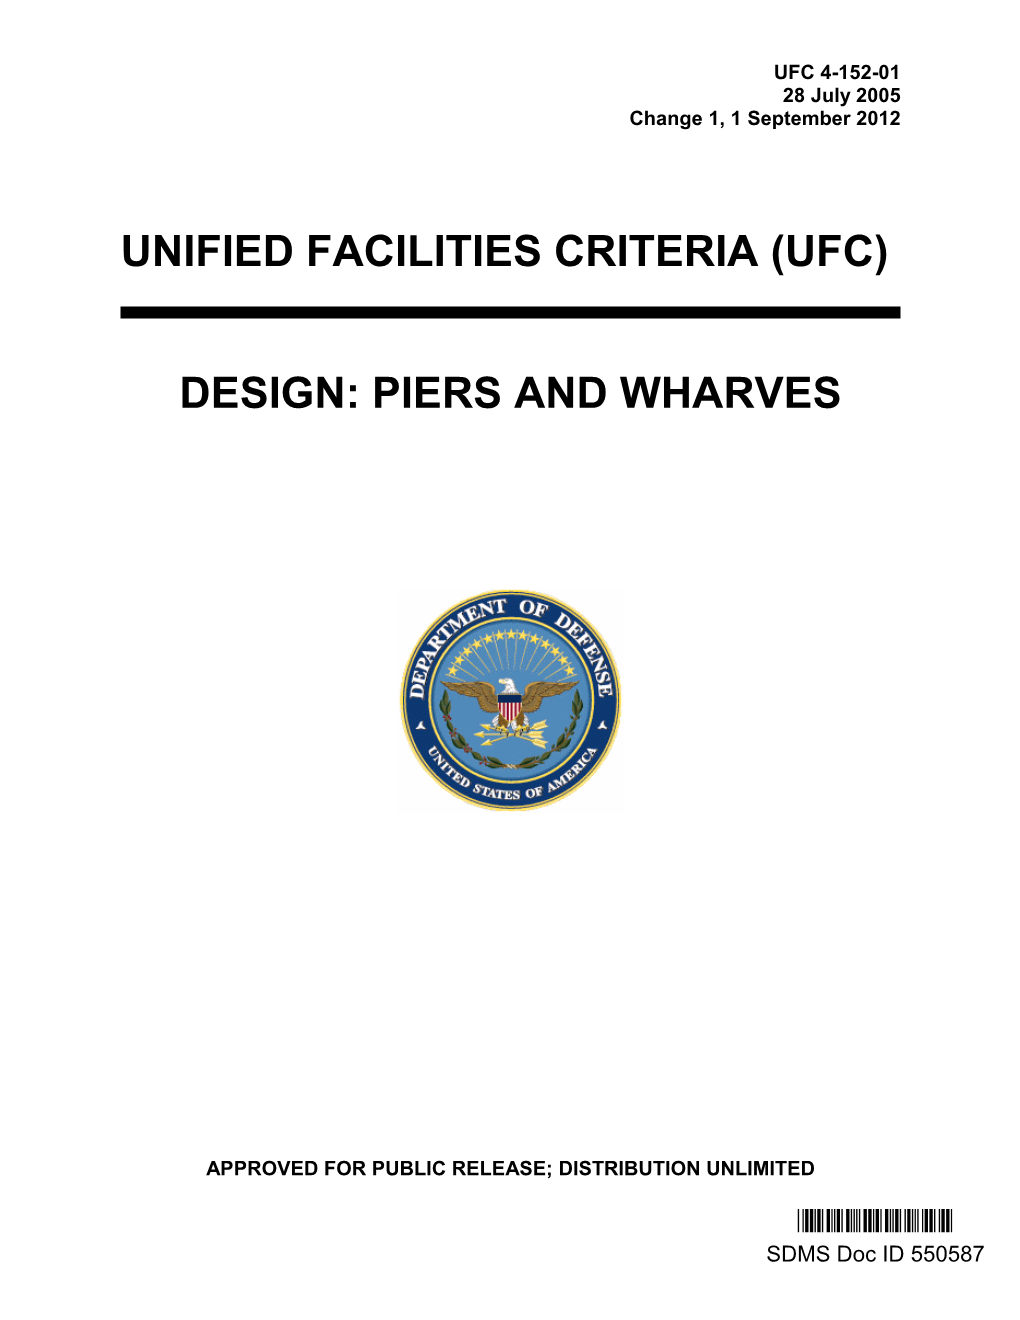 Unified Facilities Criteria (Ufc) Design: Piers and Wharves